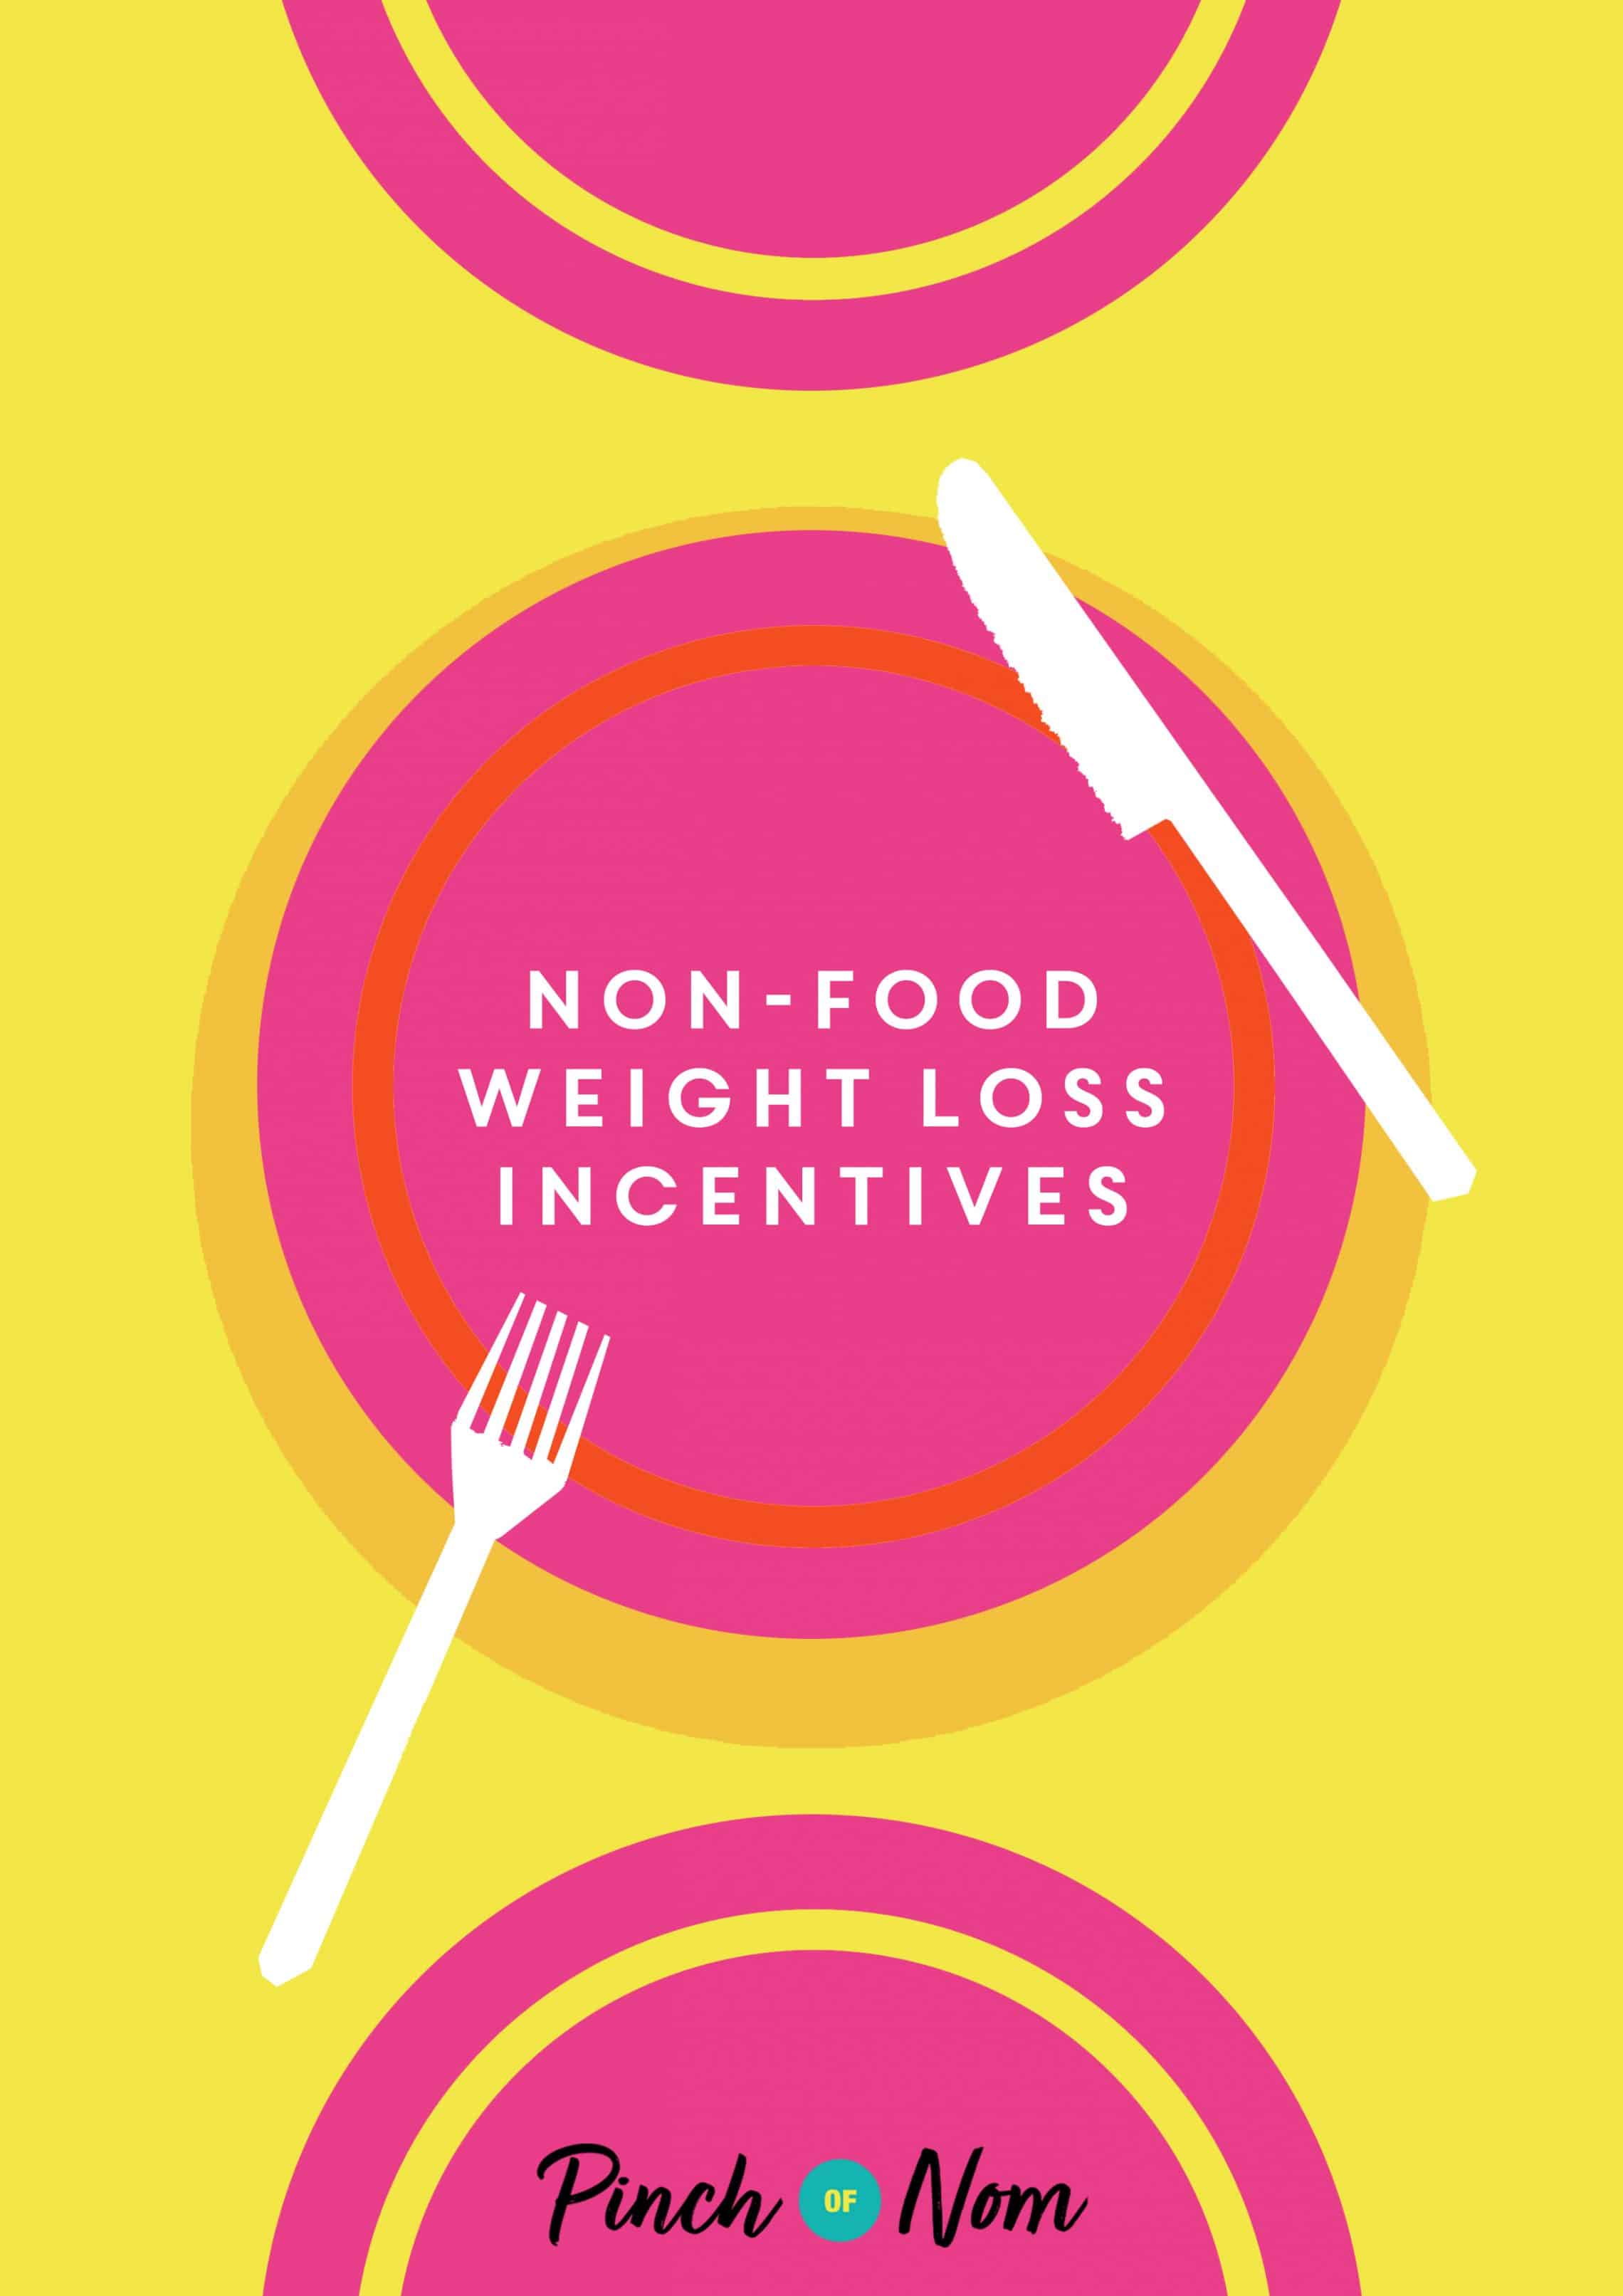 Non-Food Weight Loss Incentives